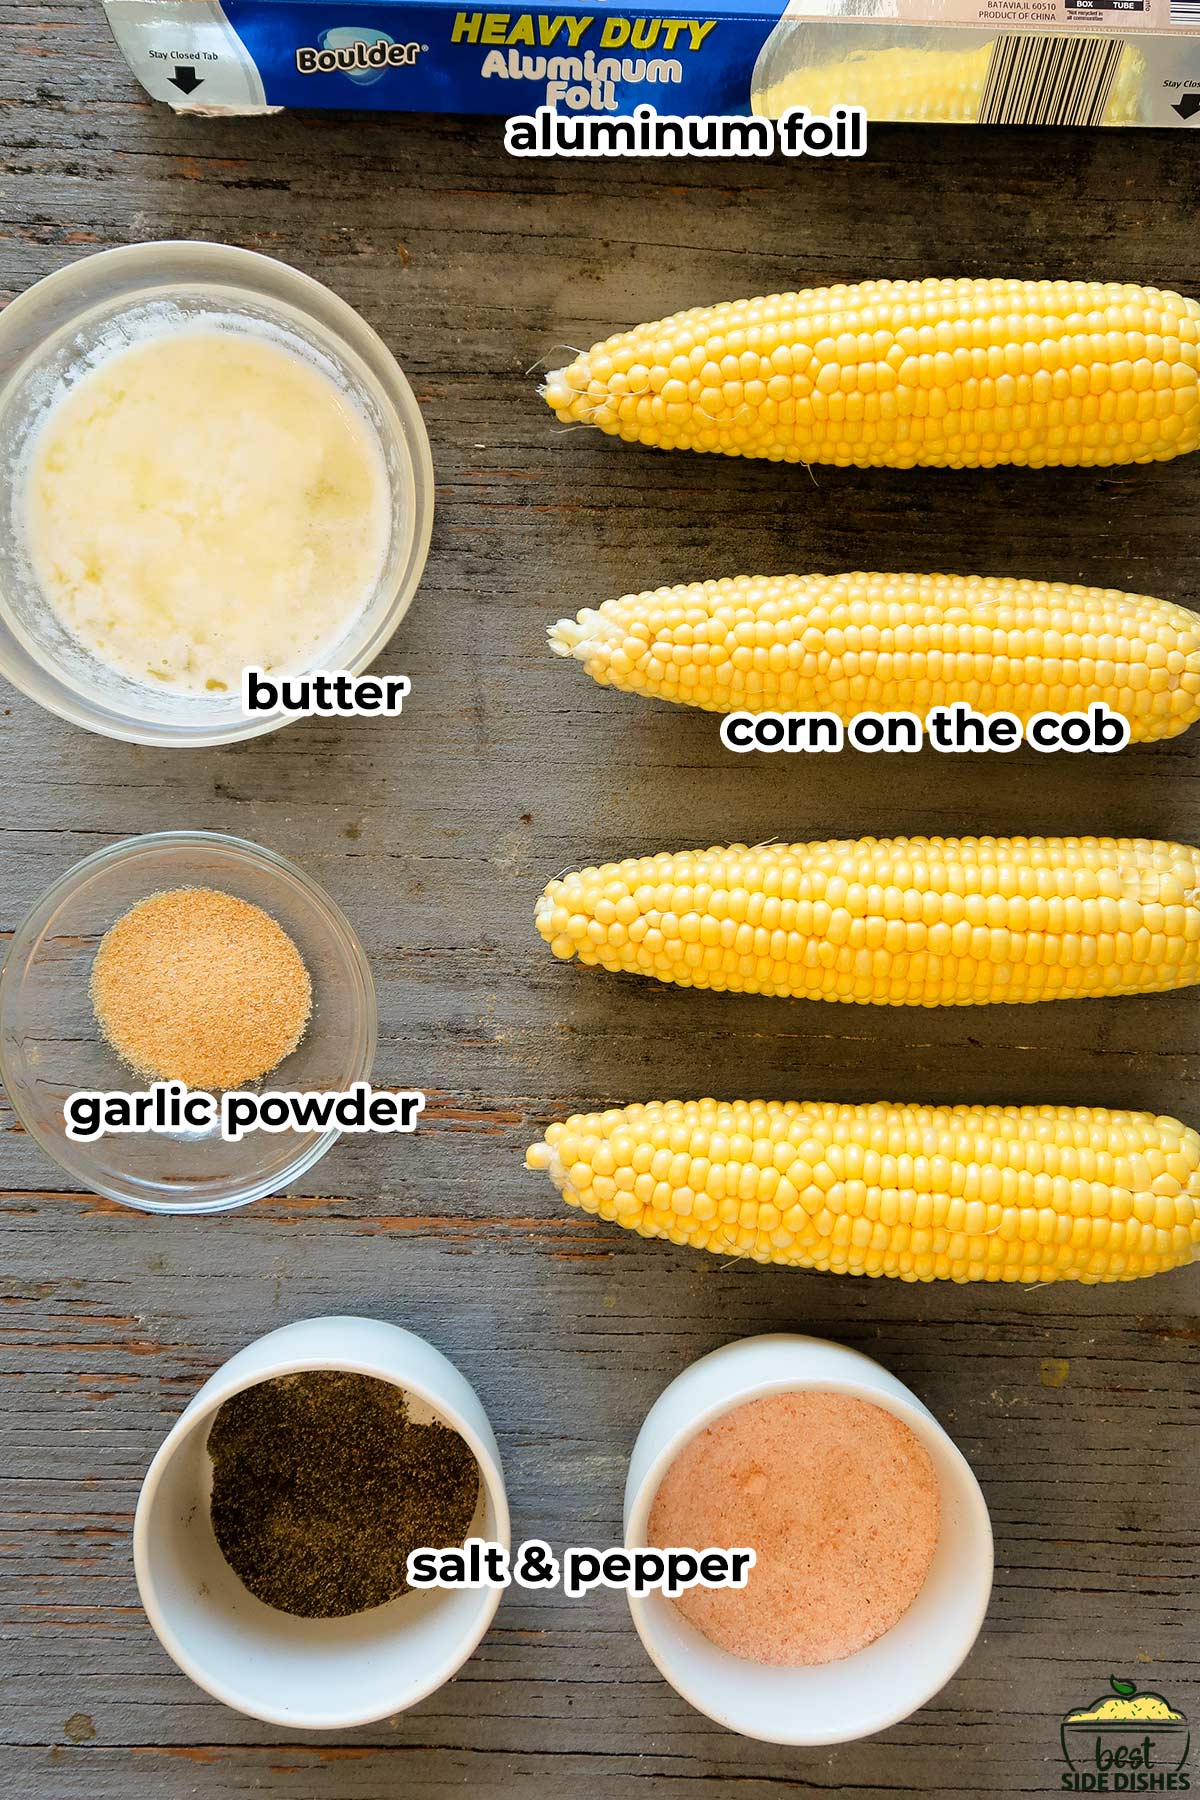 ingredients to make grilled corn on the cob including foil